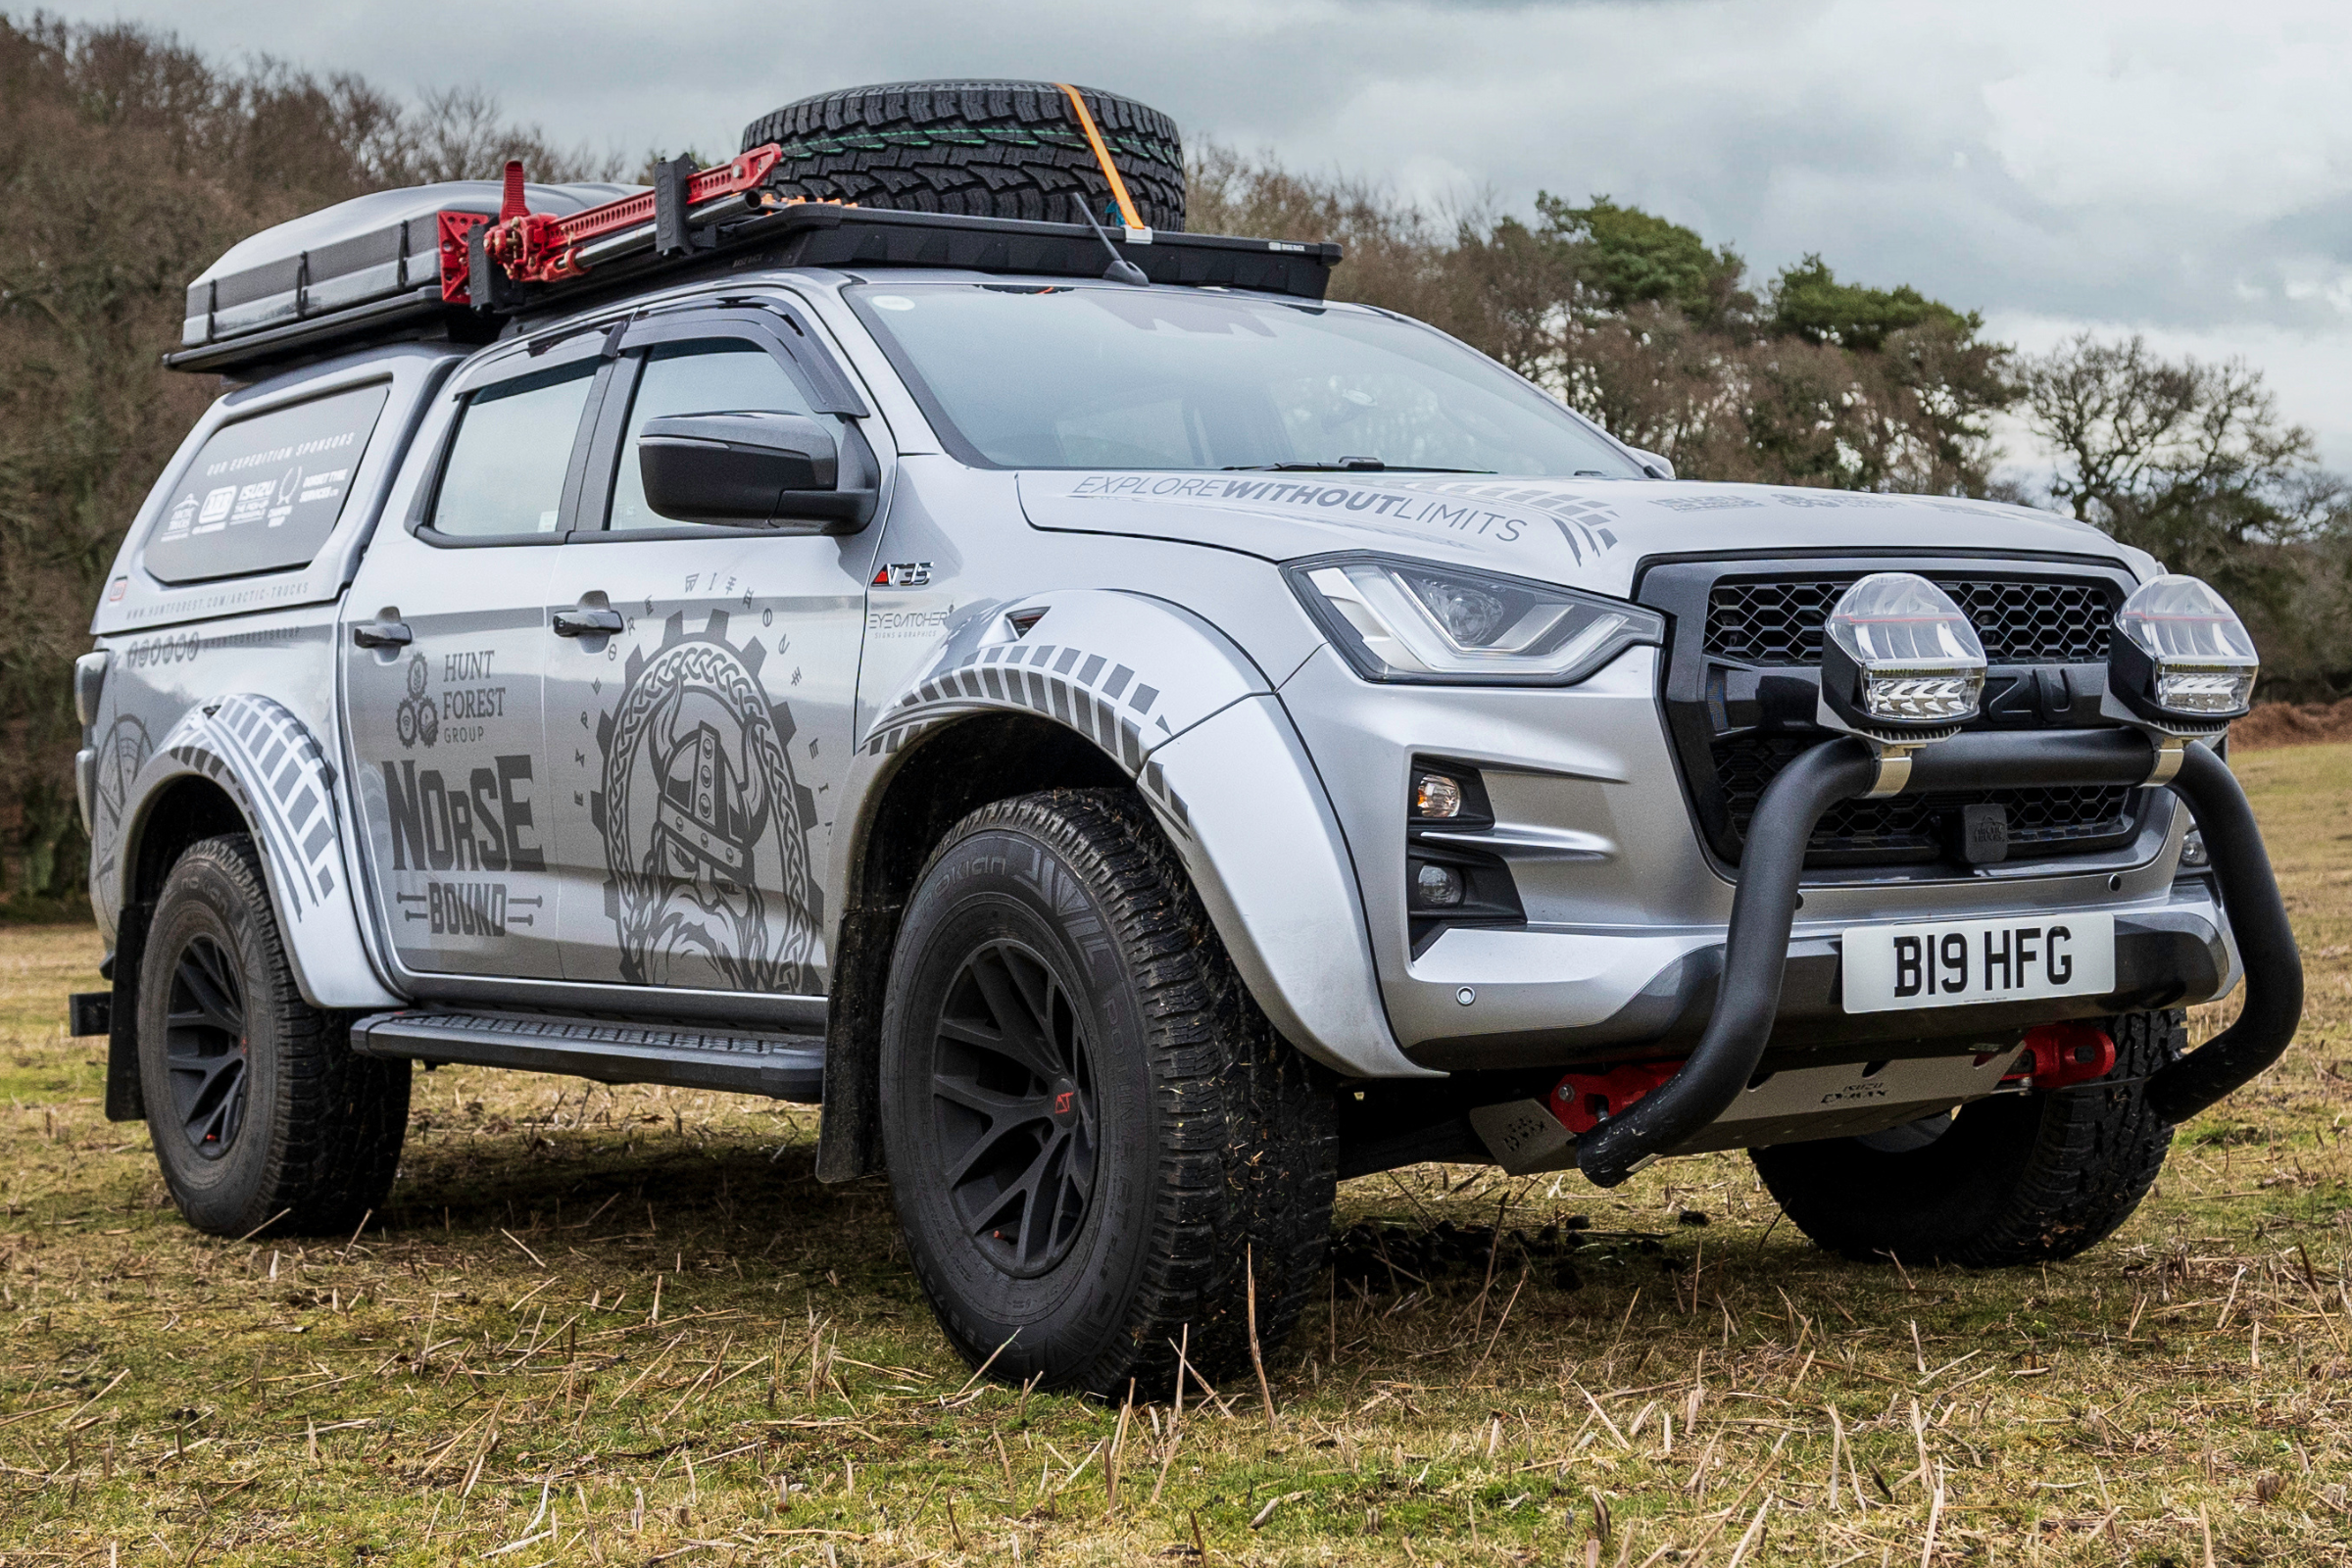 A Norse Bound adventure for this top-end D-Max pick-up